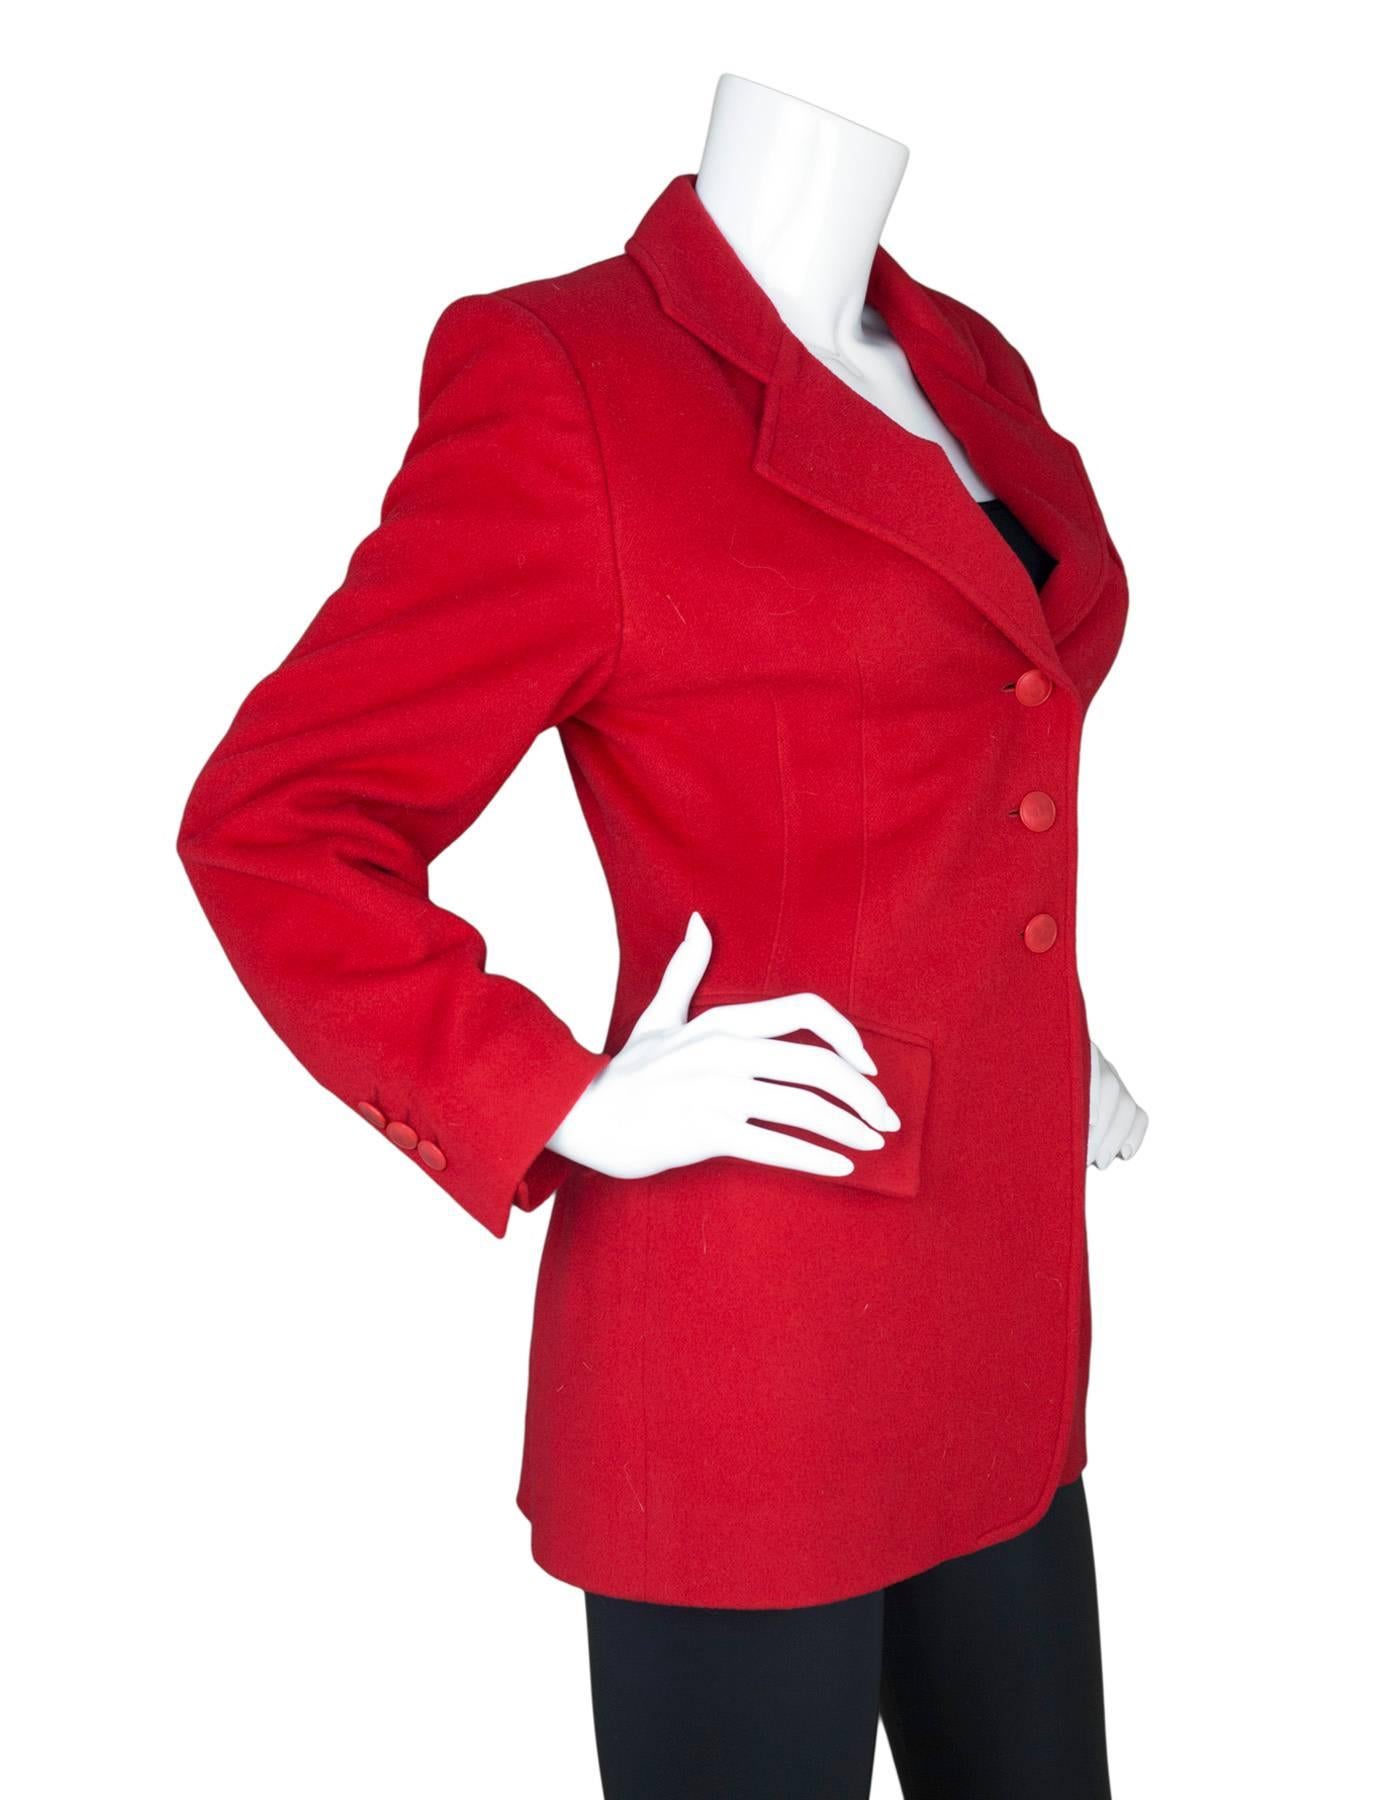 Hermes Red Cashmere Riding Jacket 
Features matching red buttons with H's on them

Made In: France
Color: Red
Composition: 100% cashmere
Lining: Red, 100% acetate
Closure/Opening: Button down front
Exterior Pockets: One breast pockets and two hip